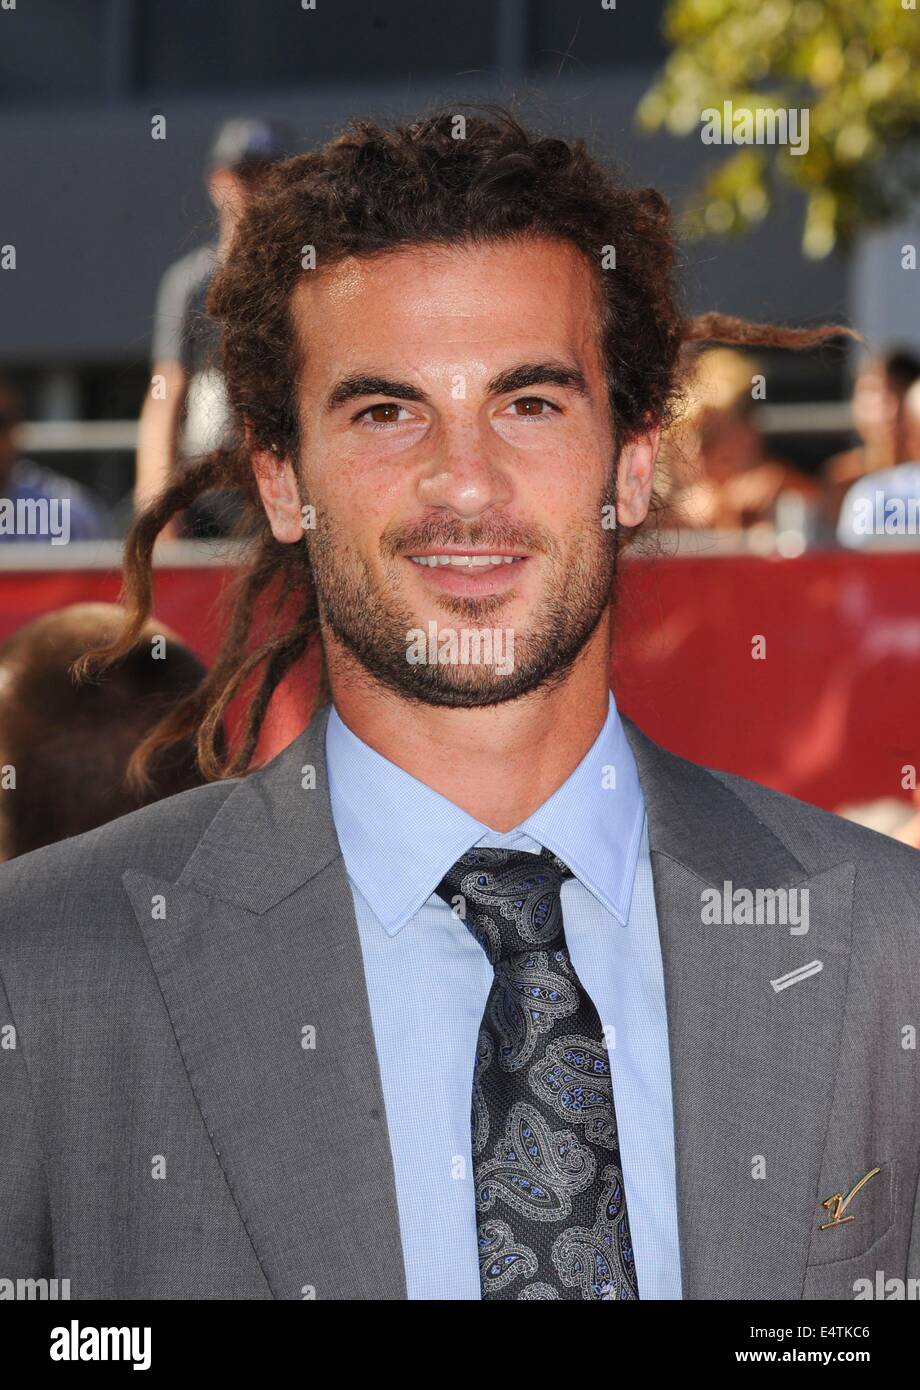 Los Angeles, CA, USA. 16th July, 2014. Kyle Beckerman at arrivals for The 2014 ESPYS - Arrivals, Nokia Theatre L.A. LIVE, Los Angeles, CA July 16, 2014. Credit:  Elizabeth Goodenough/Everett Collection/Alamy Live News Stock Photo